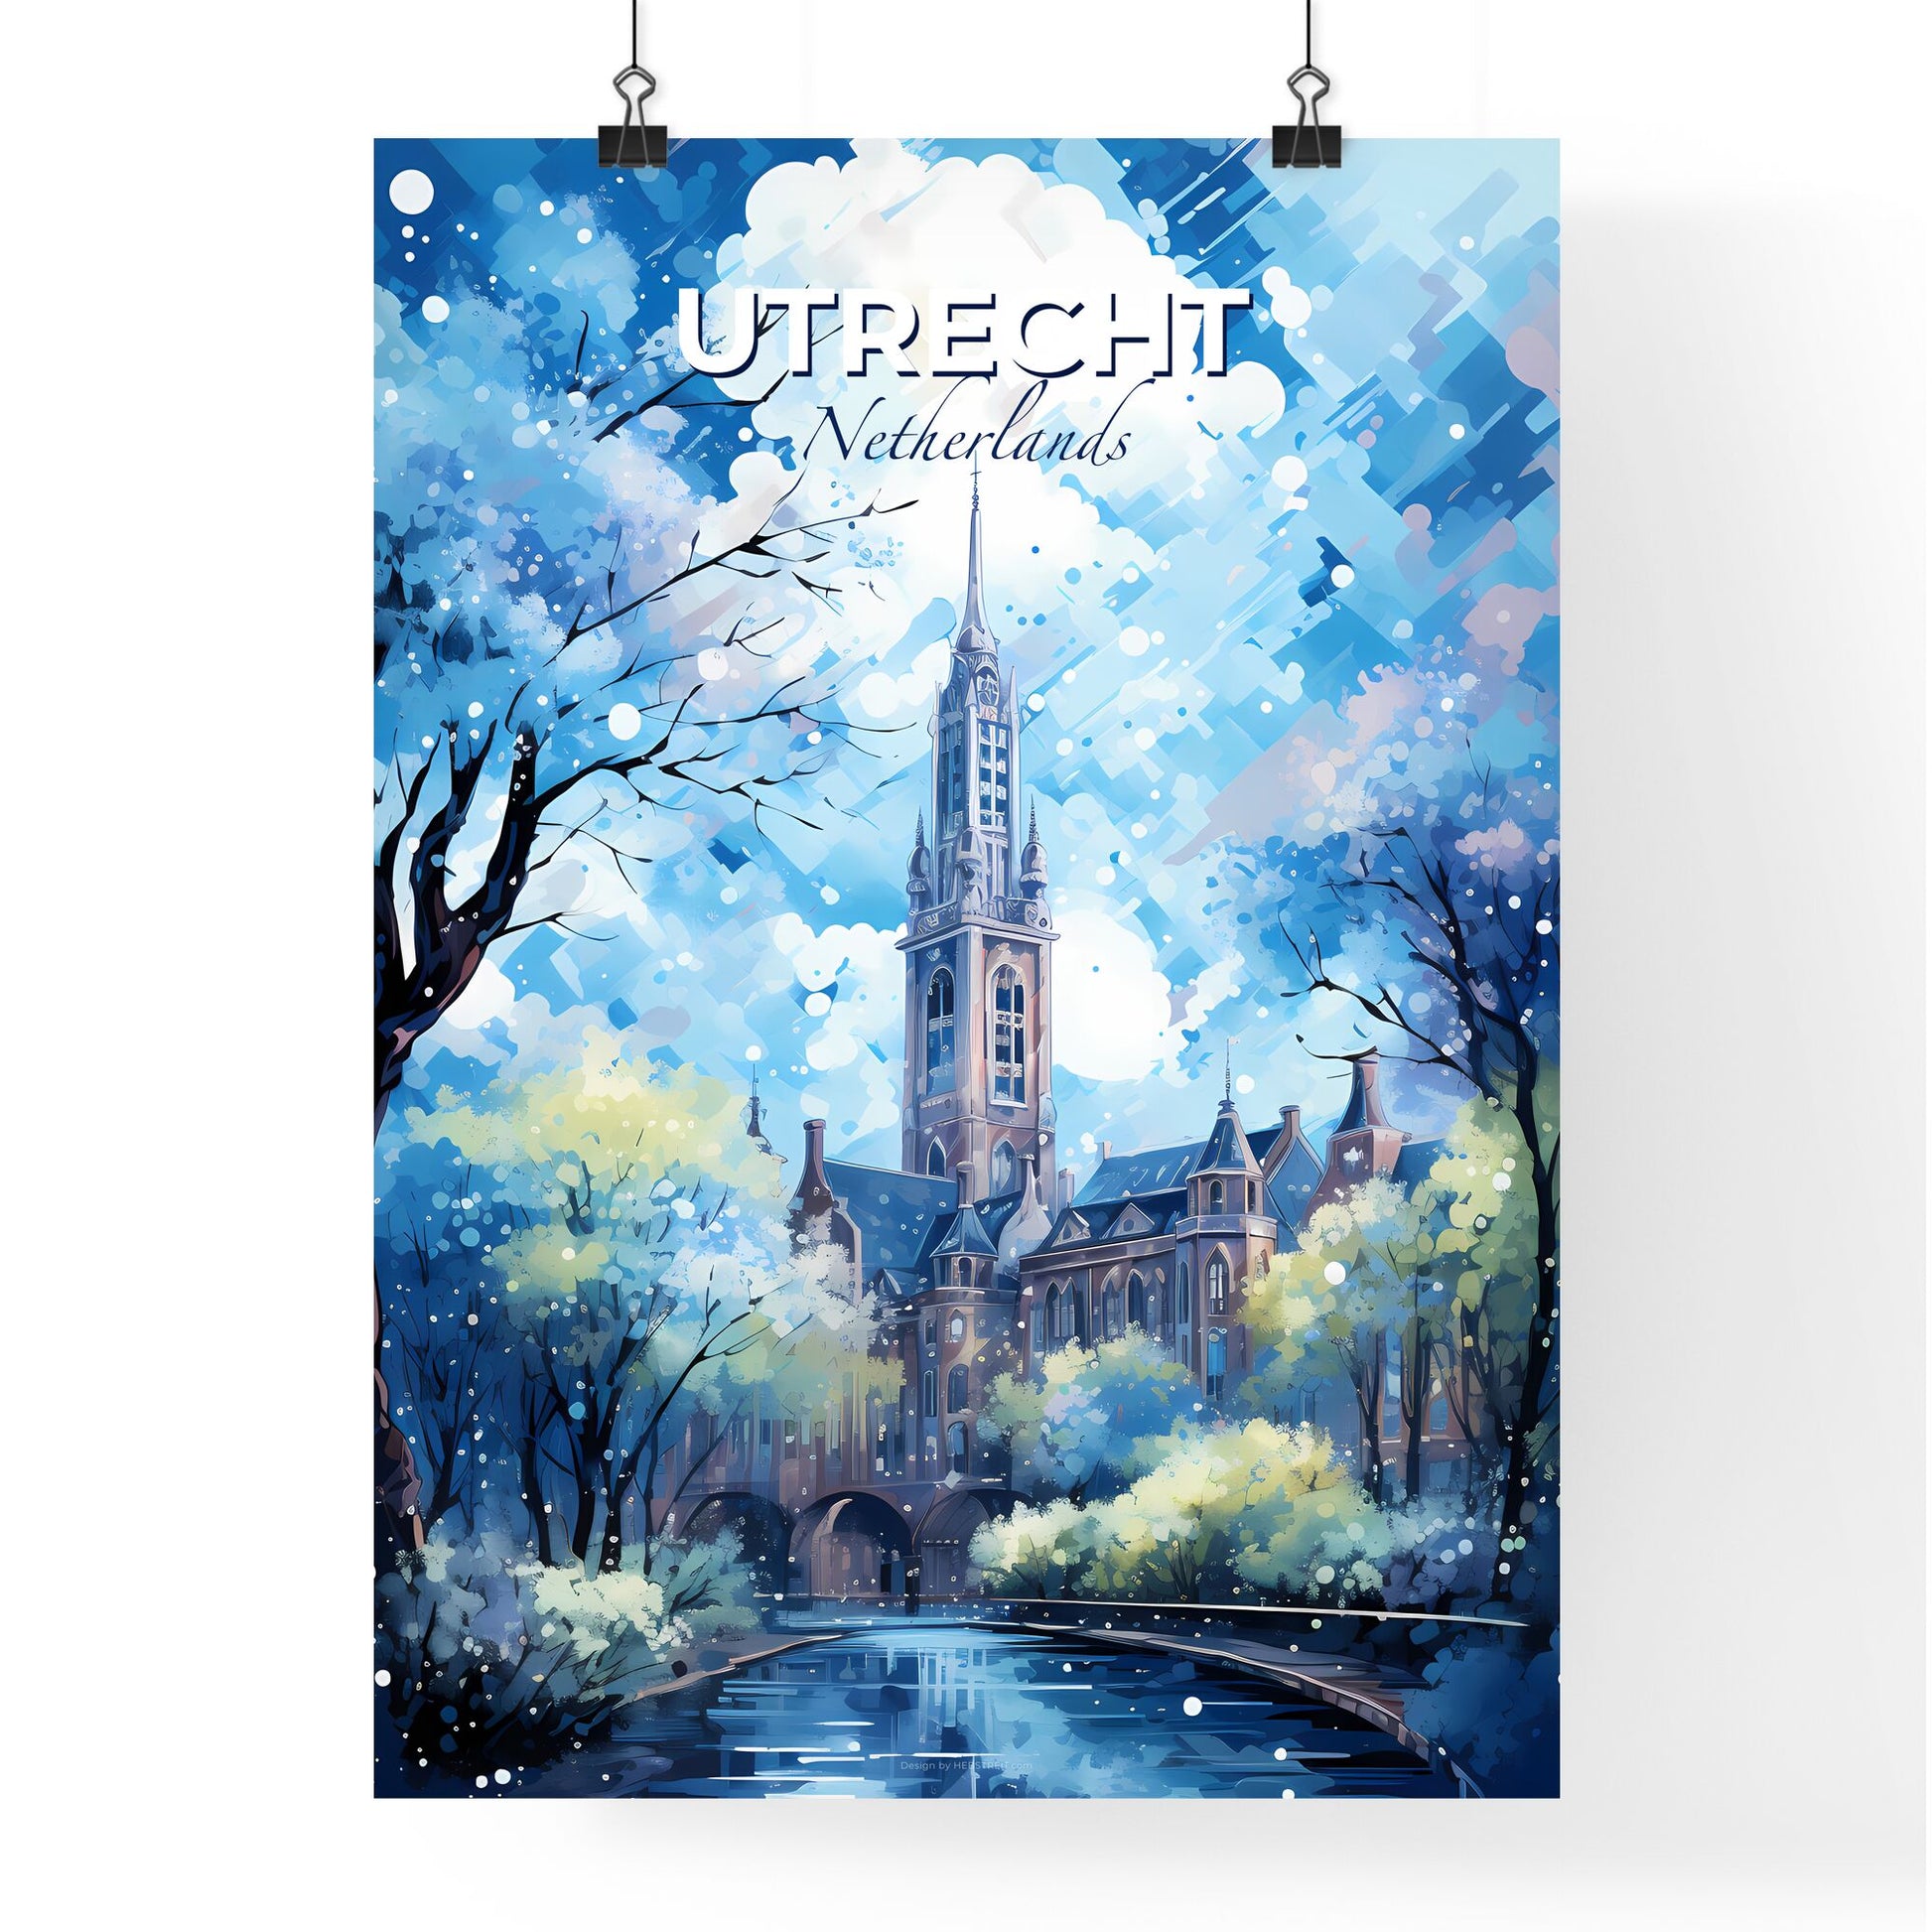 Utrecht Netherlands Skyline - A Painting Of A Building With Trees And A Tower - Customizable Travel Gift Default Title